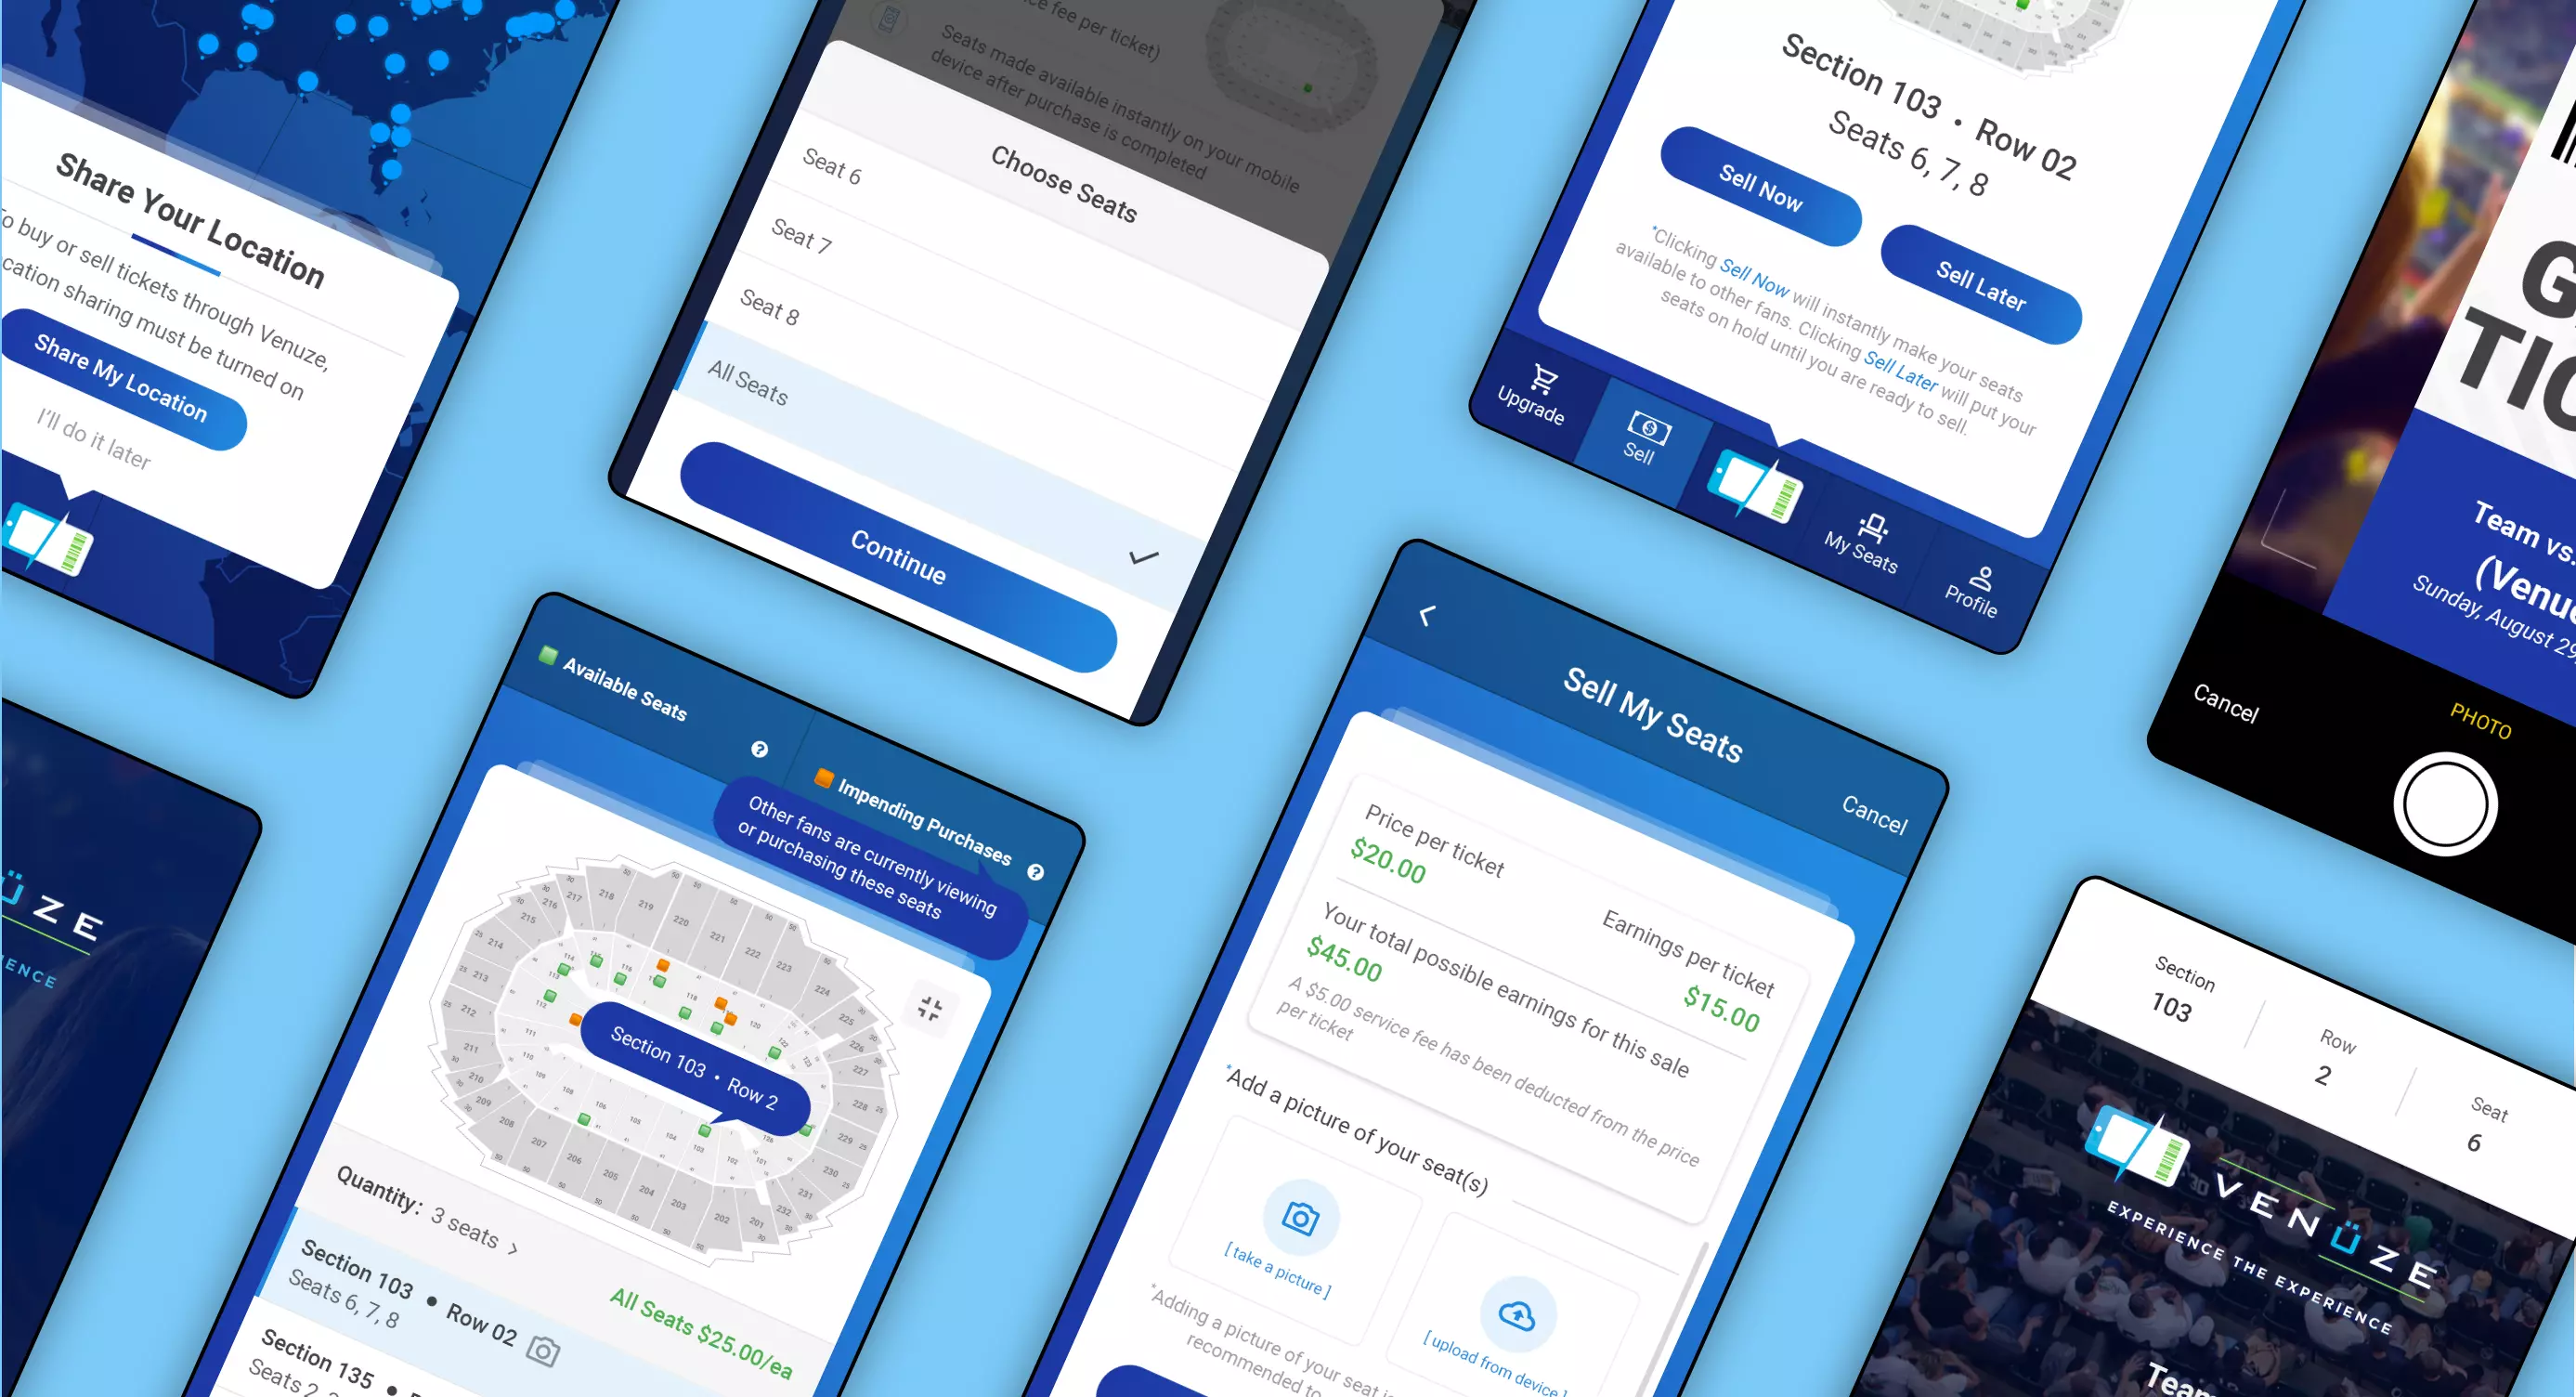 Venuze, a mobile app for in-game ticket buying and selling